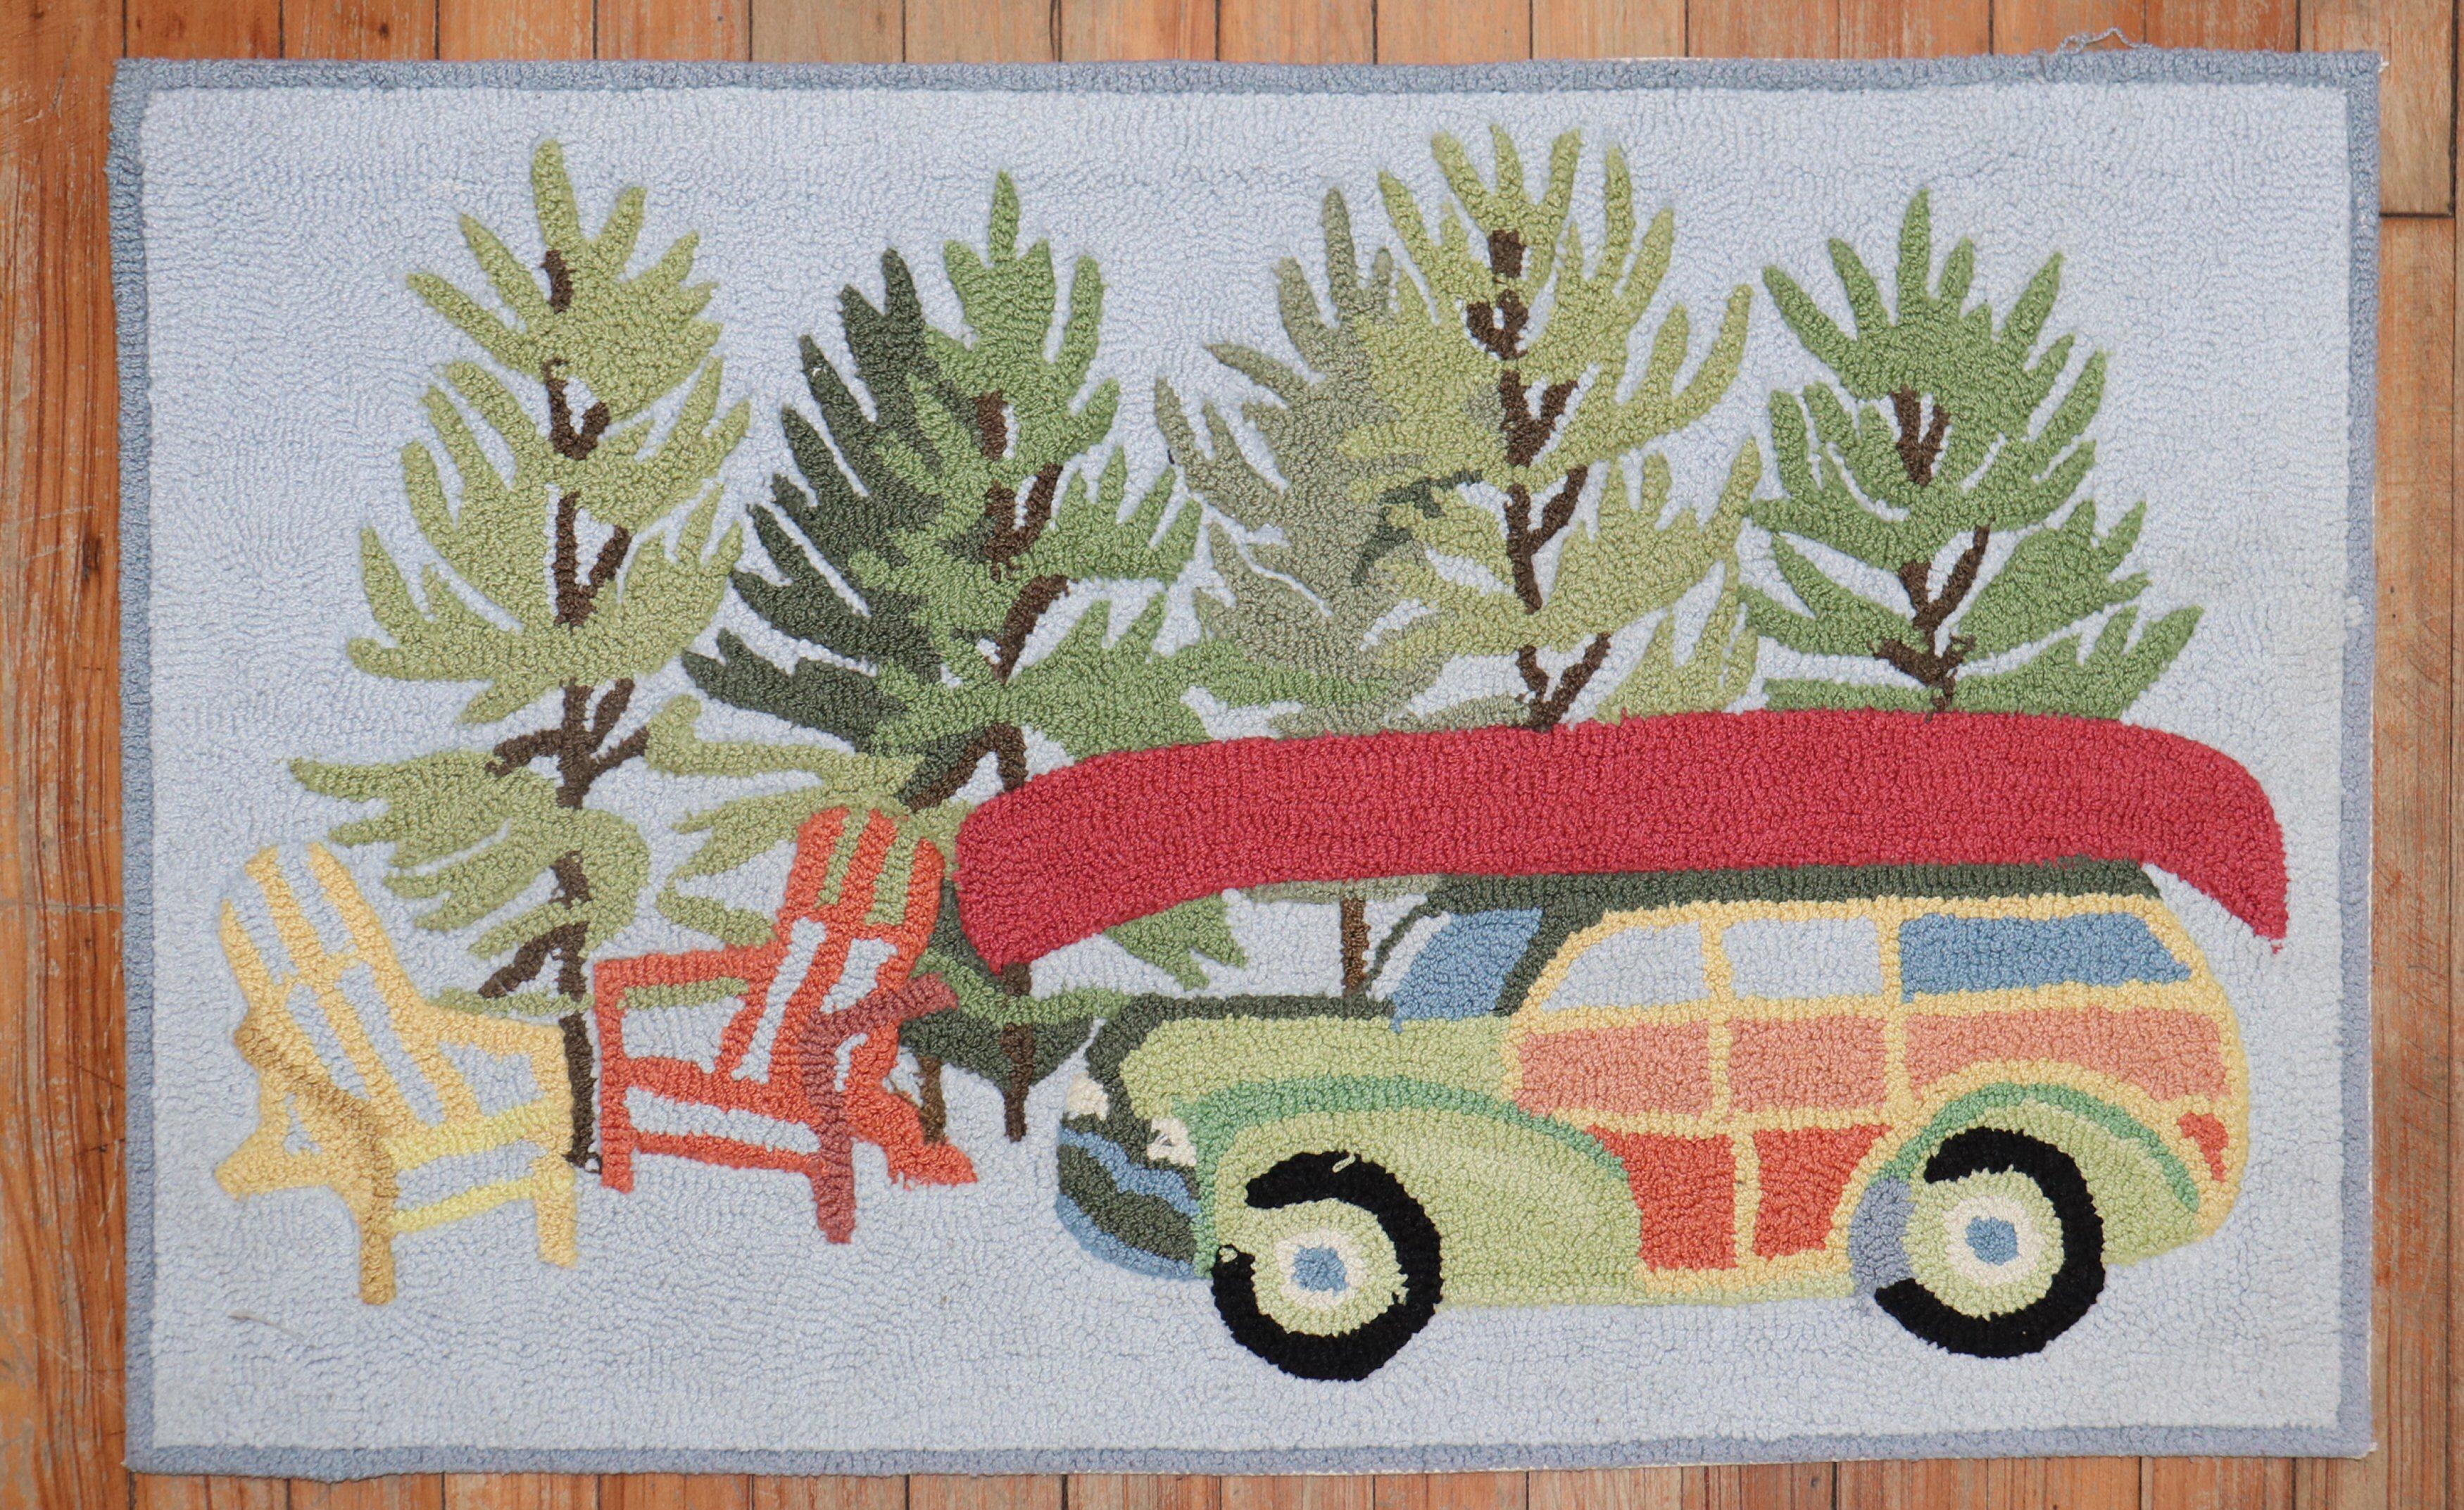 Late 20th century colorful hand-loomed American hooked rug with a red canoe on top of a small car surrounded by a few trees and 2 chairs

Measures: 1'10'' x 2'9''.